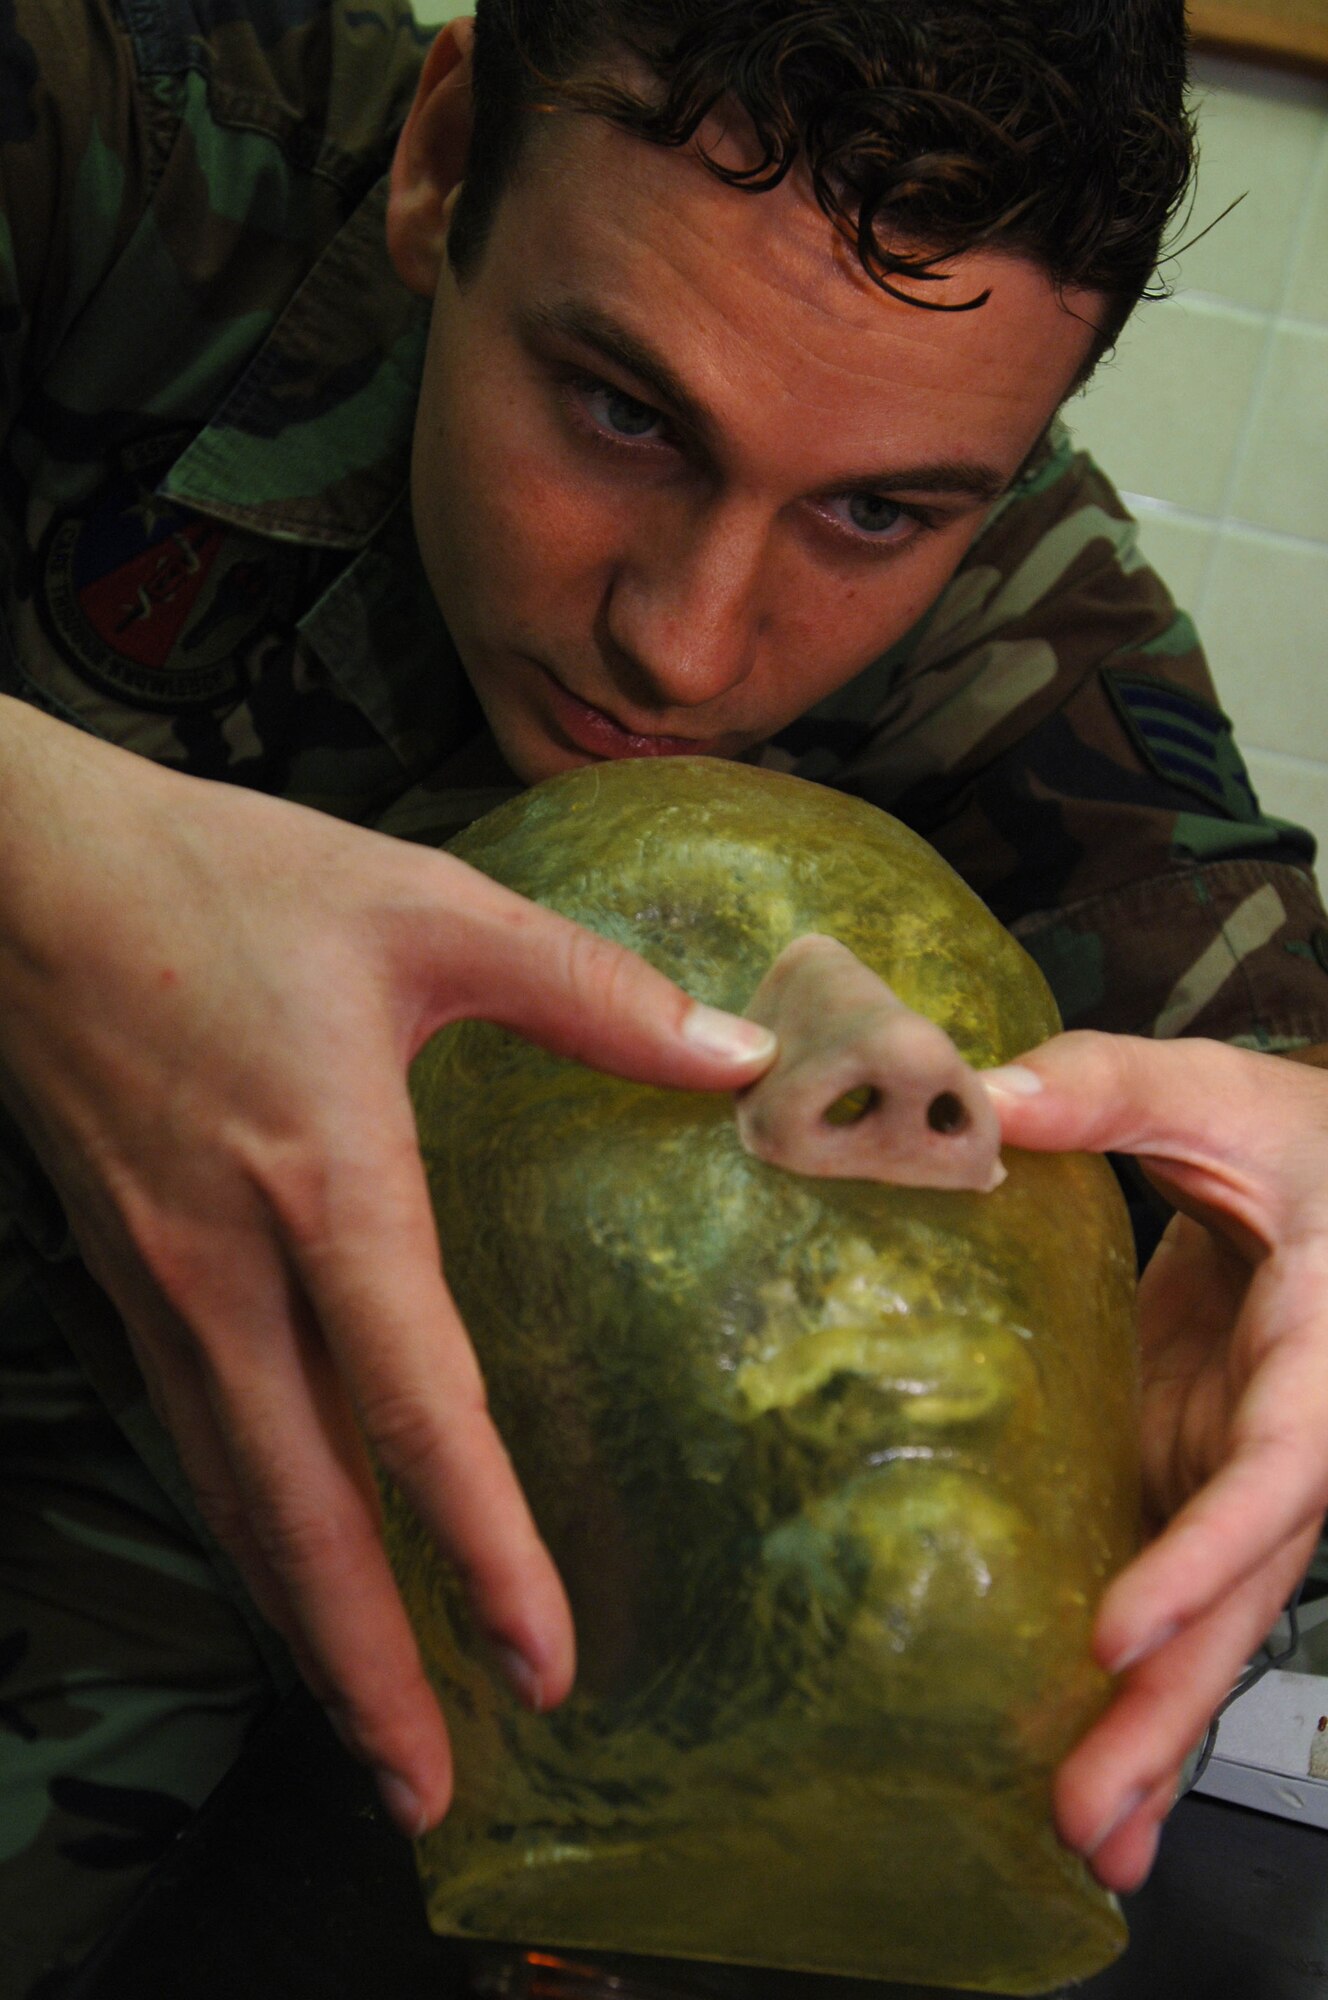 Maxillofacial prosthetic technician Senior Airman Justin Jones, 59th Dental Squadron, checks the fit and finish on a nose he is sculpting as part of a patient's reconstructive treatment. (U.S. Air Force photo/Staff Sgt. Erin Peterson)